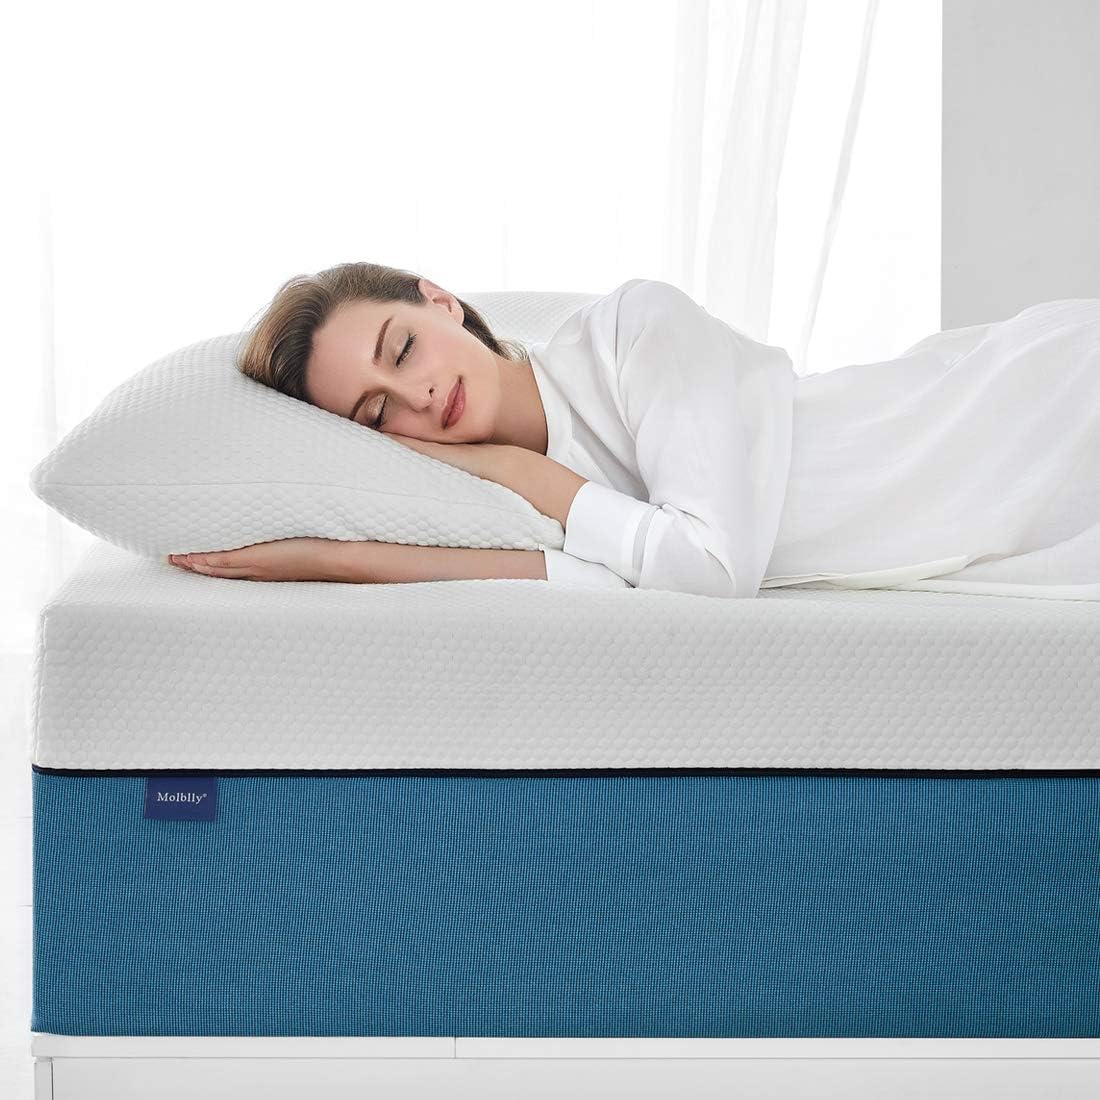 NEW - Molblly Queen Size Mattress, 12 inch Cooling-Gel Memory Foam Mattress in a Box, Fiberglass Free,Breathable Bed Mattress for Cooler Sleep Supportive & Pressure Reliefï¼Œ 60" X 80" X 12" - Retail $289